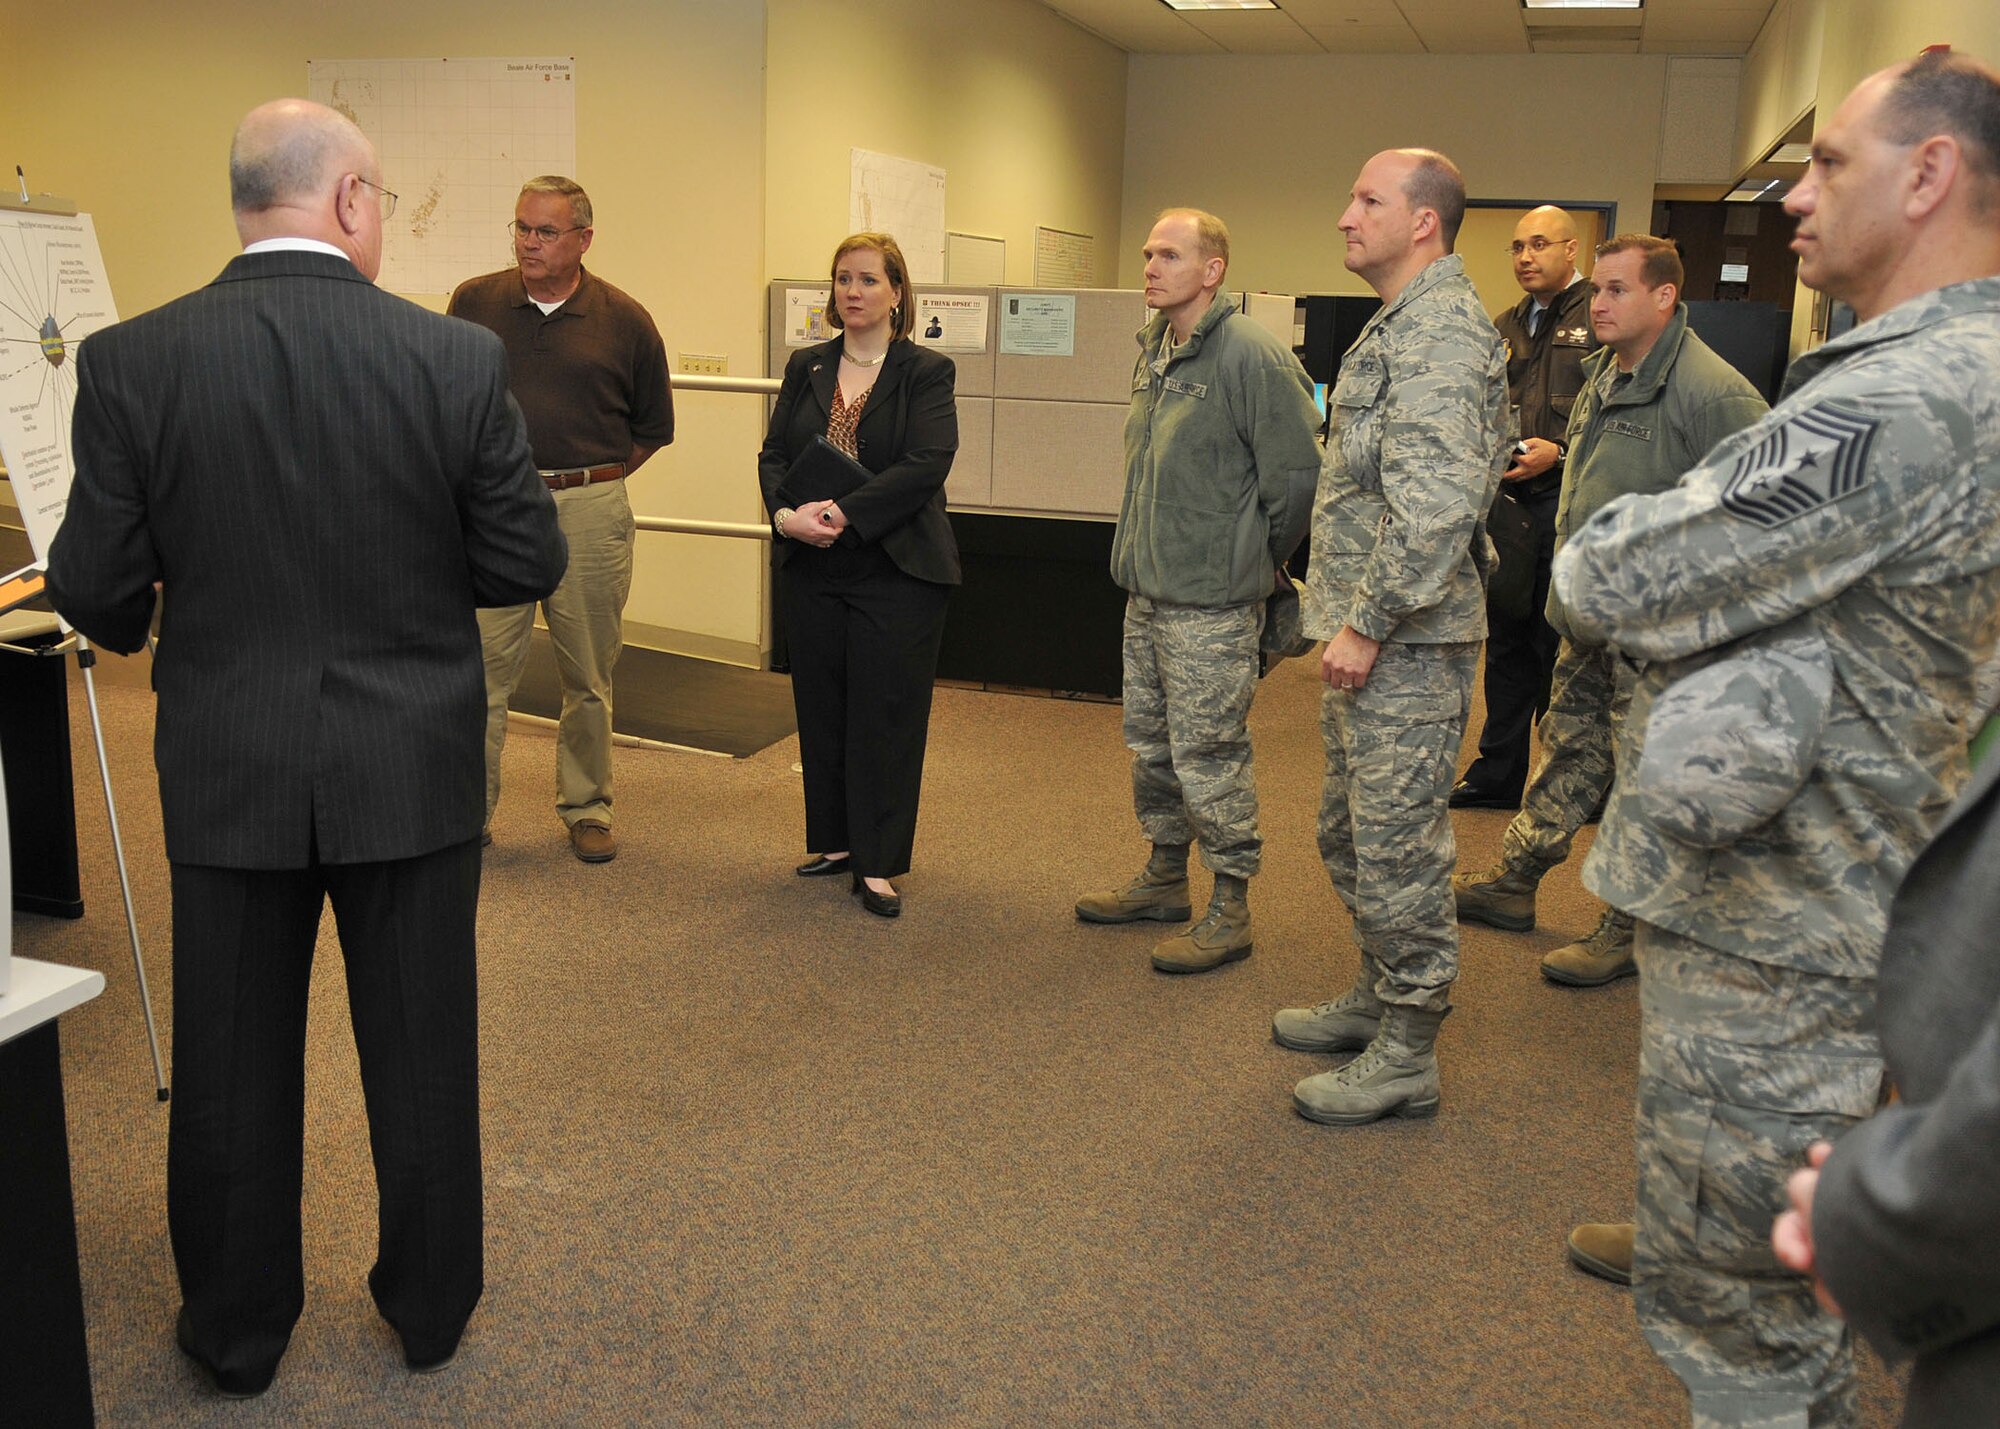 Under Secretary of the Air Force Erin Conaton receives a briefing from 548th Intelligence, Surveillance and Reconnaissance Group leadership during a tour of Beale Air Force Base, Calif., March 7, 2012. During her tour, Conaton was briefed on numerous squadron, group and wing functions highlighting Beale's ISR missions.  (U.S. Air Force photo/Staff Sergeant Jonathan Fowler/Released)